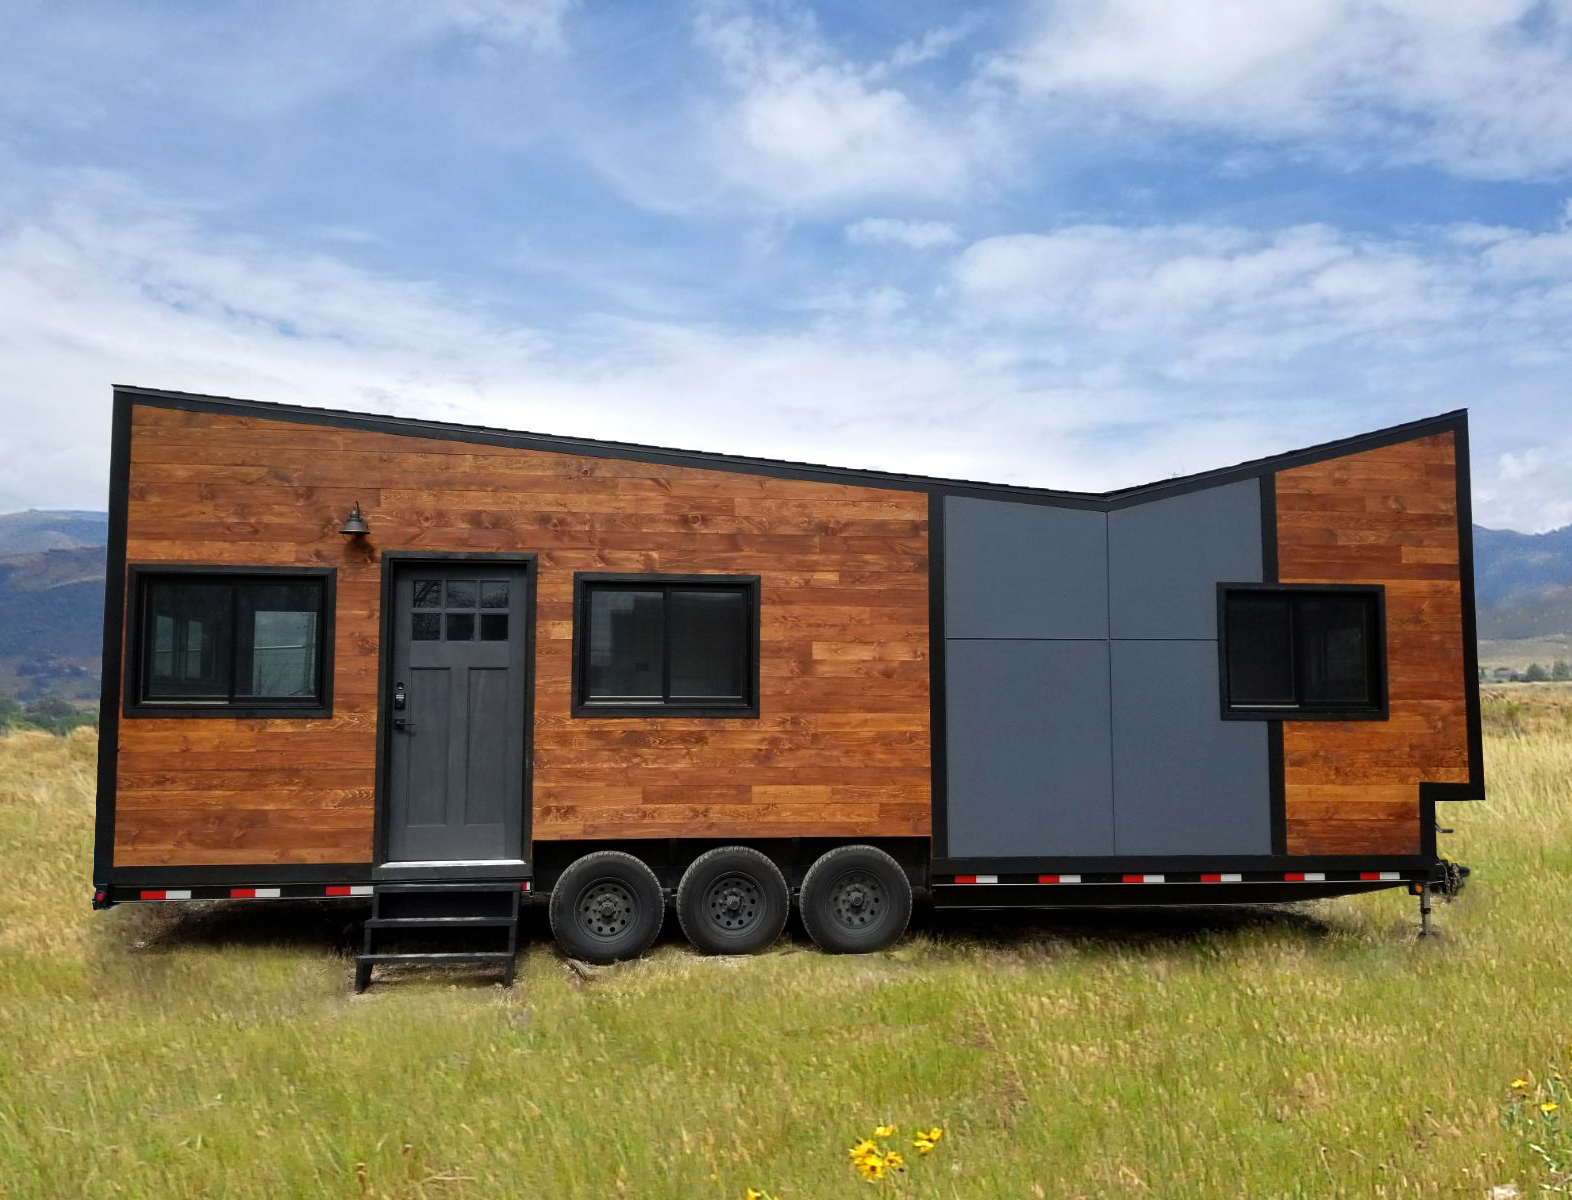 Where Can I Put My Tiny House A Near Comprehensive List Of Tiny House Parking Resources Tiny House Builders B B Micro Manufacturing,Cute Diy Gifts For Friends